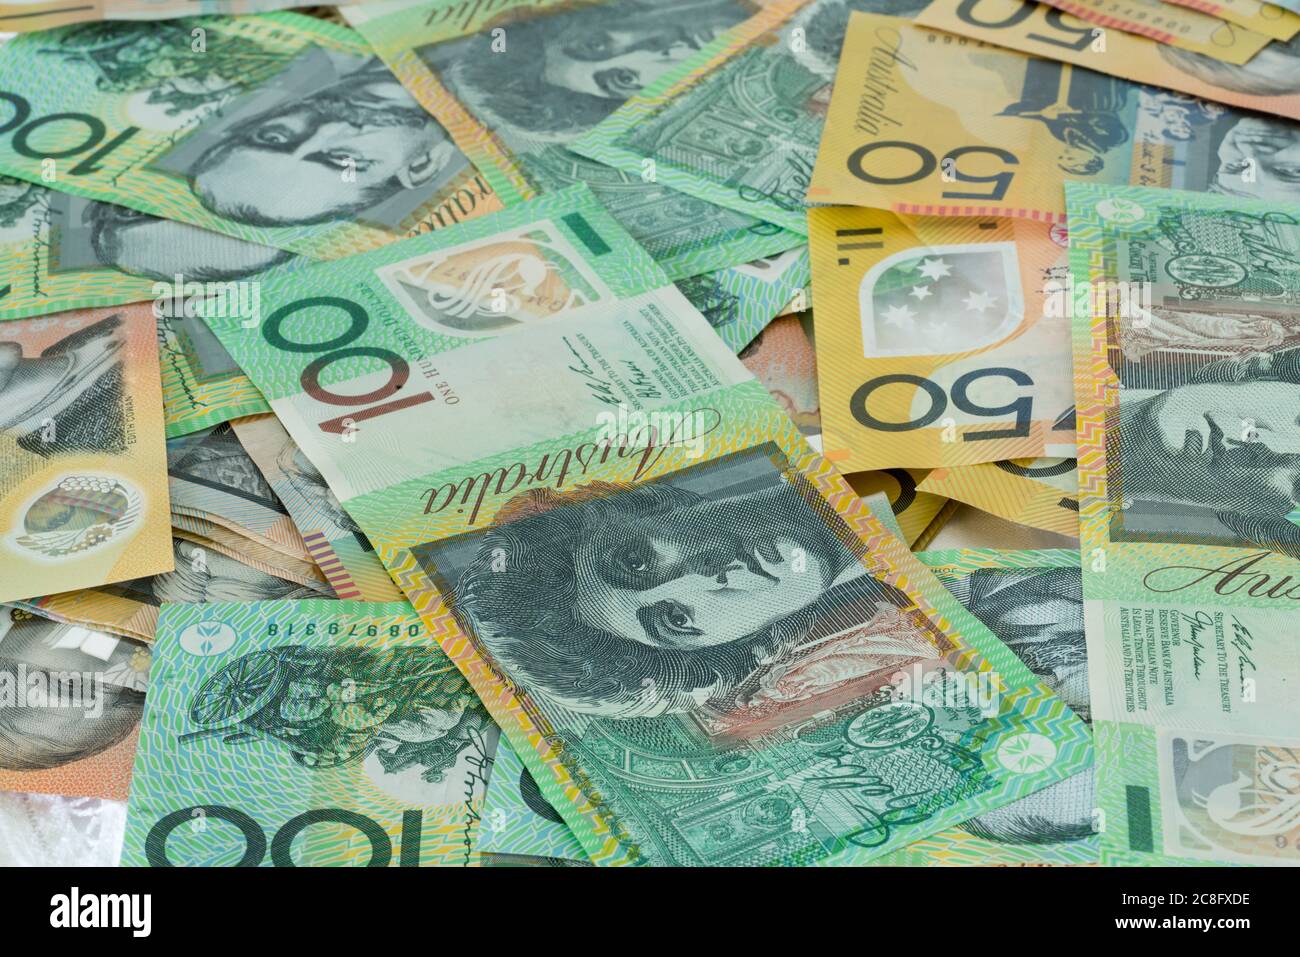 Australian Currency High Resolution Stock Photography and Images - Alamy